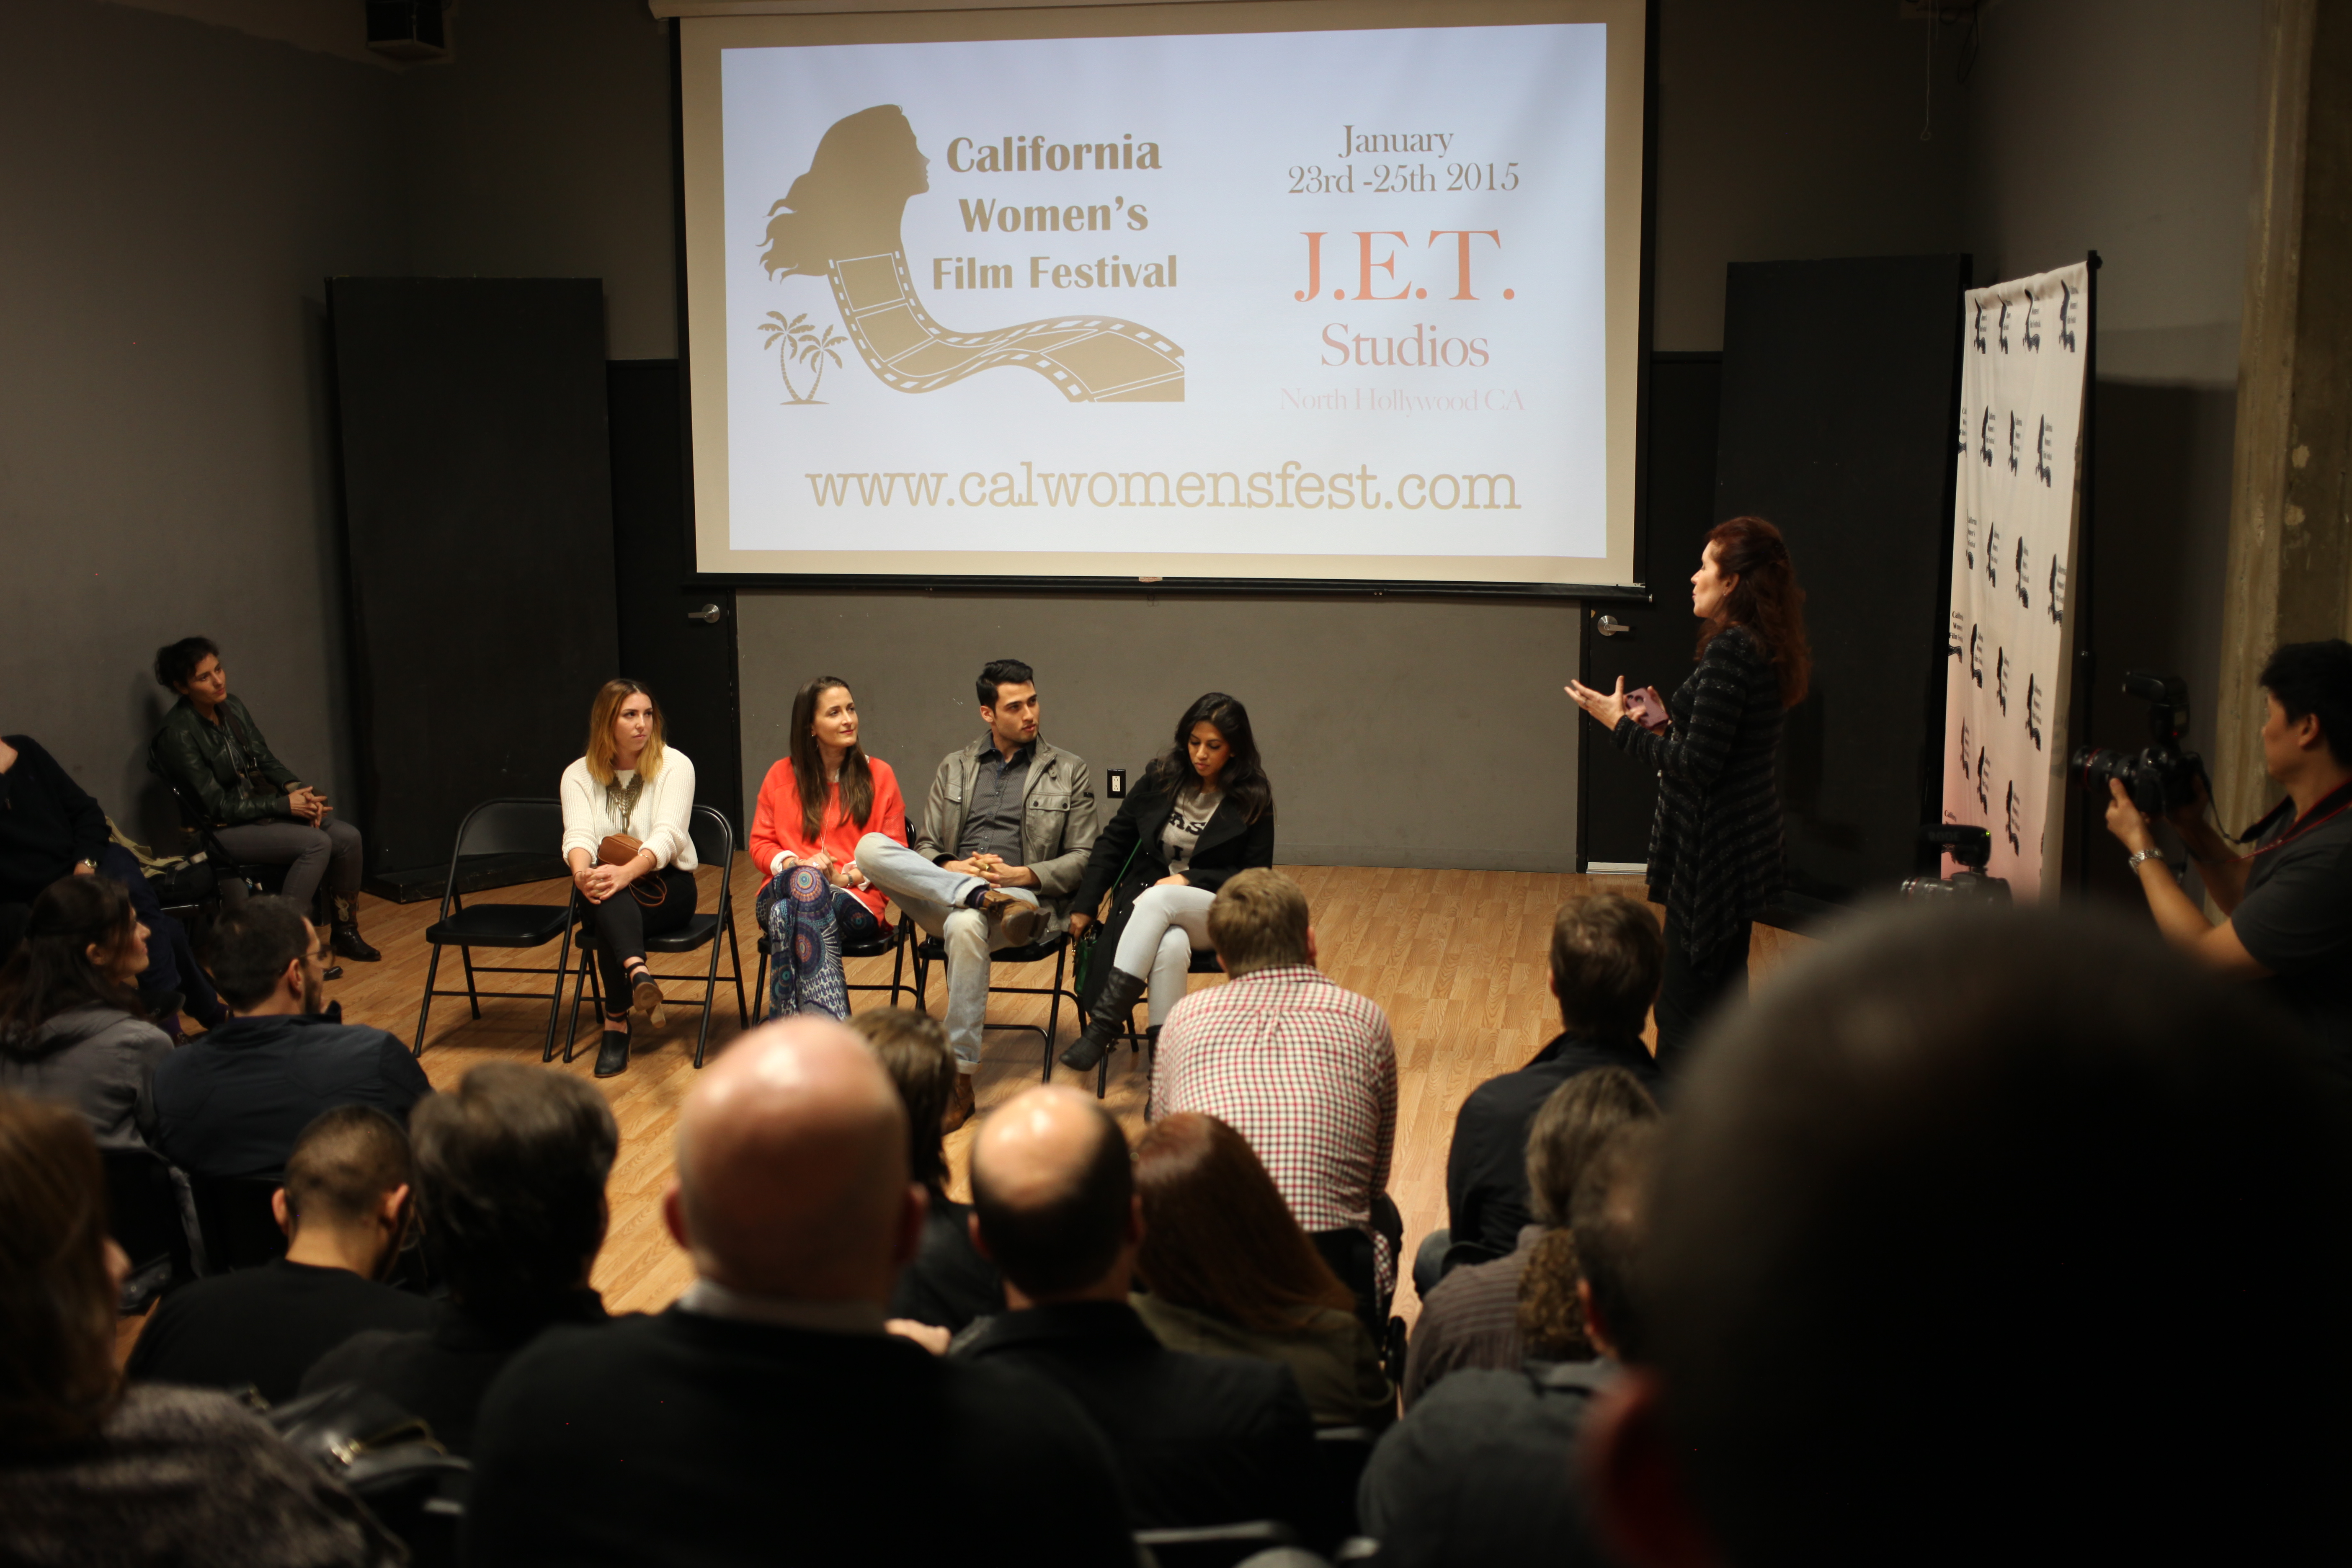 Q&A following the Wedlocked screening at the California Women's Film Festival 25/01/15